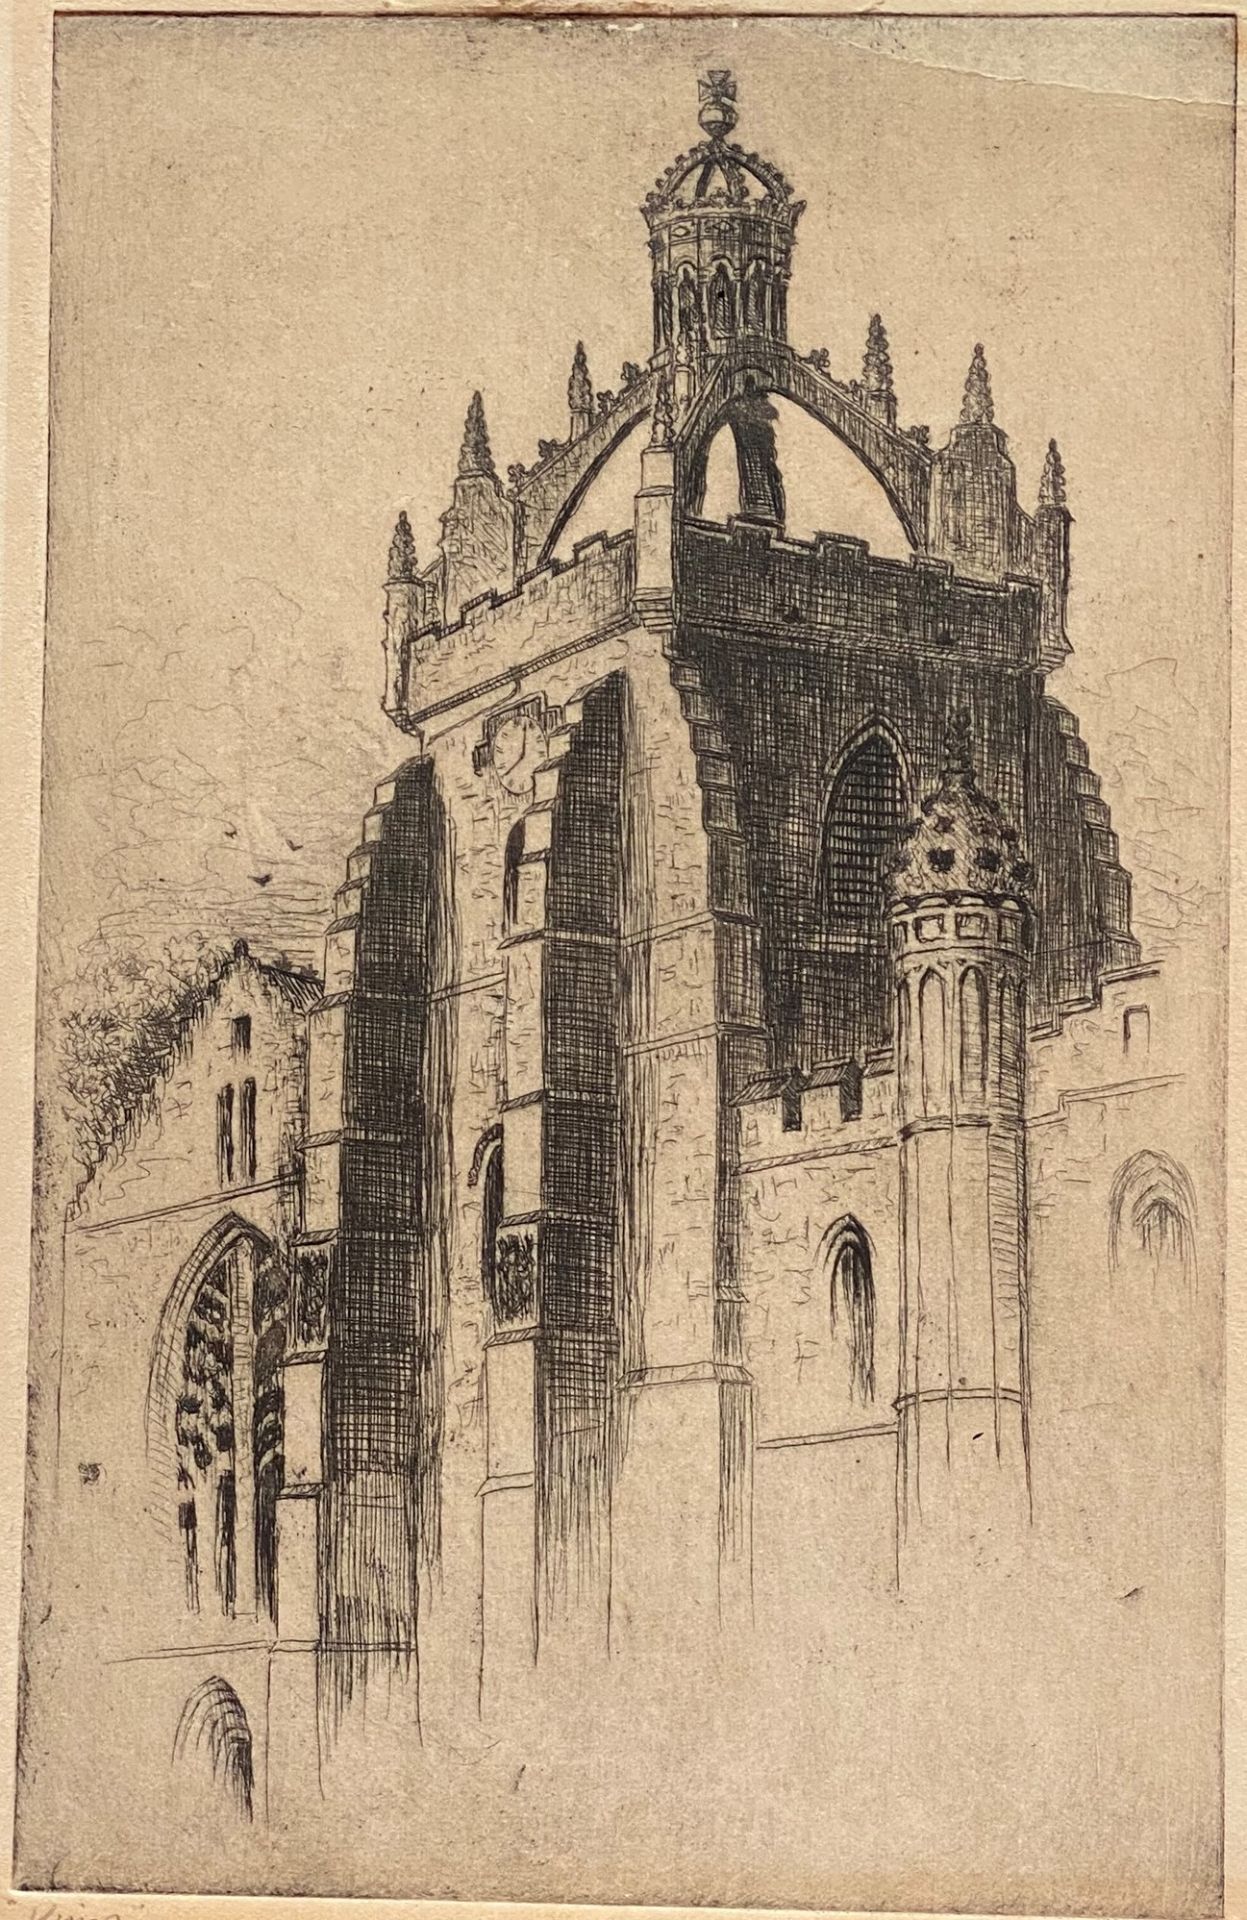 Kenneth M Still signed and titled etching "Kings College"